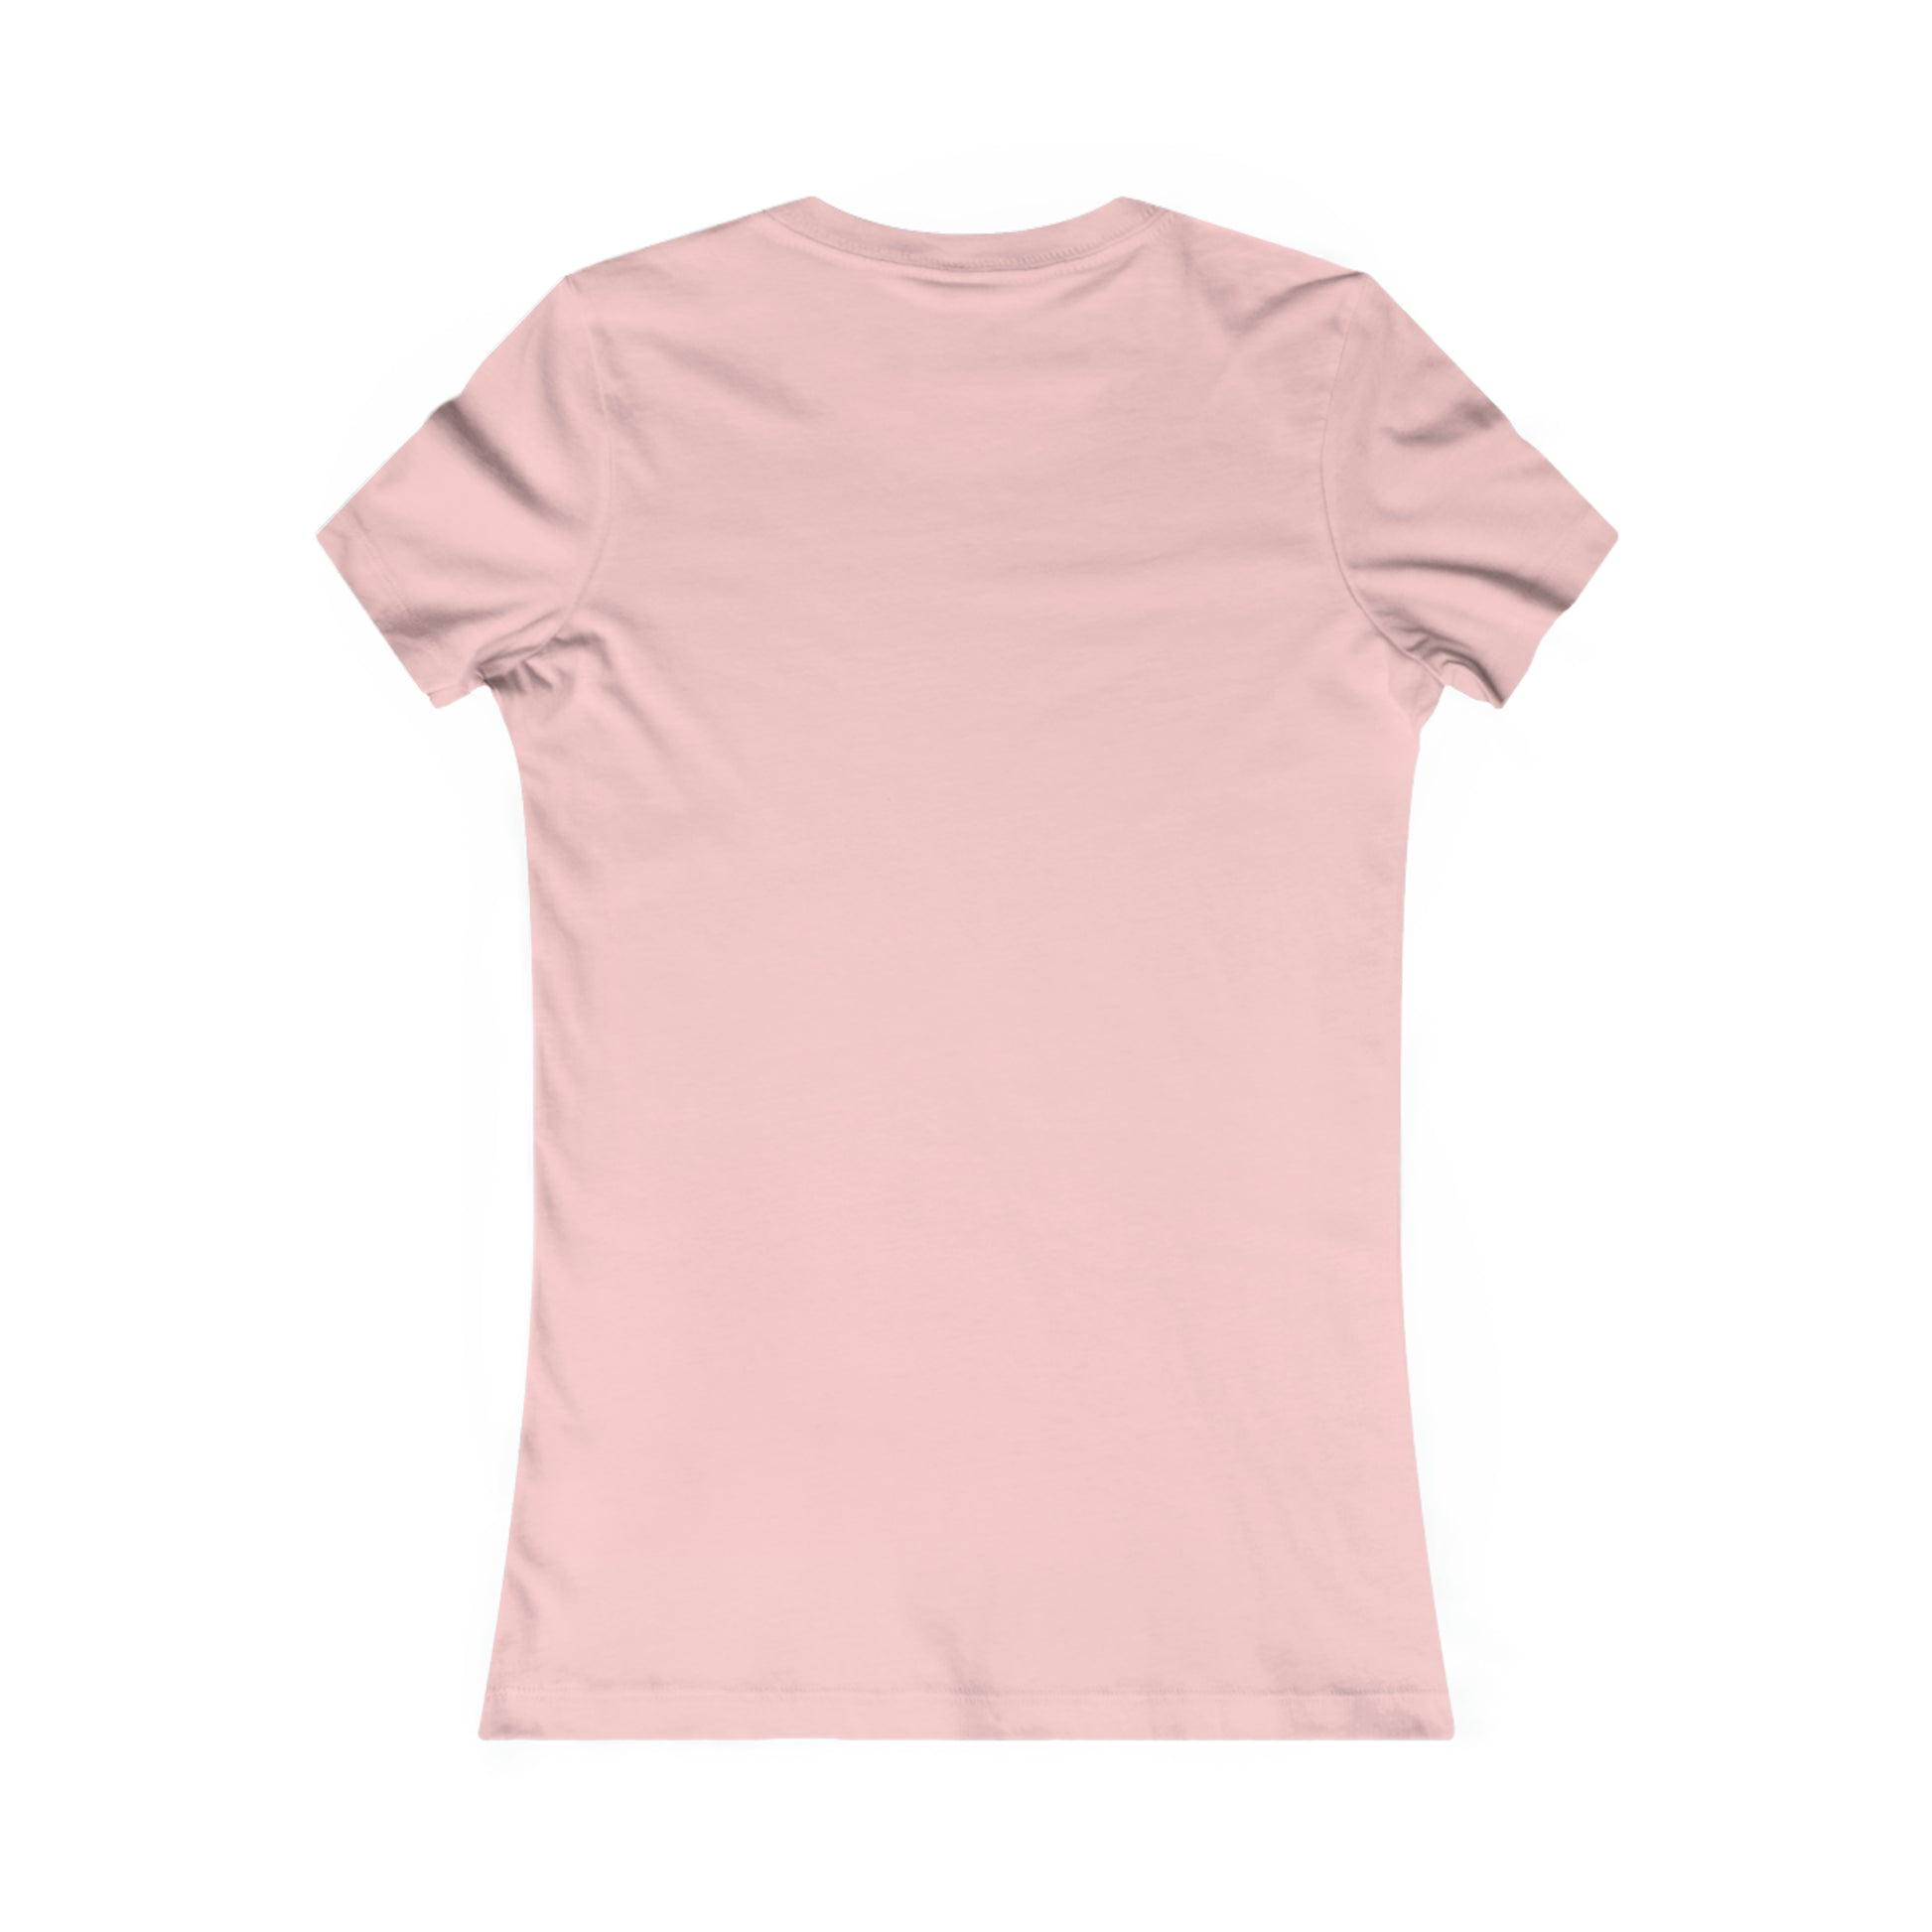 Flat back view of the pink t-shirt